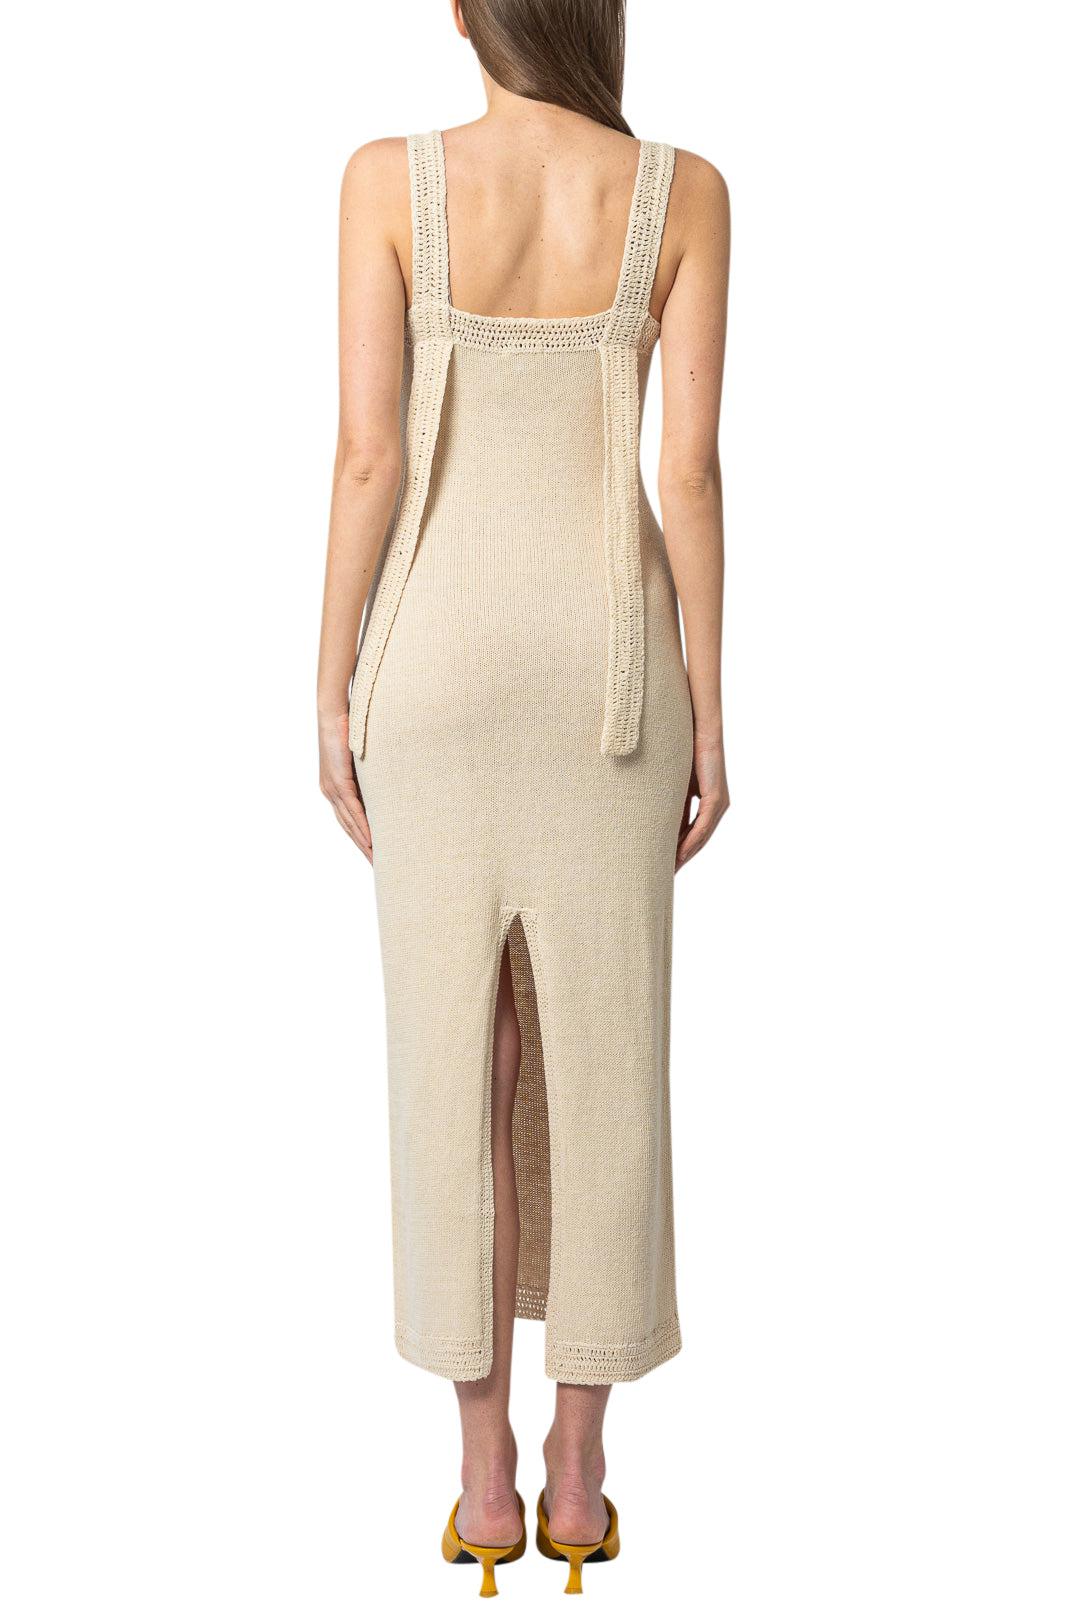 The Garment-Ribbed knit long dress-dgallerystore